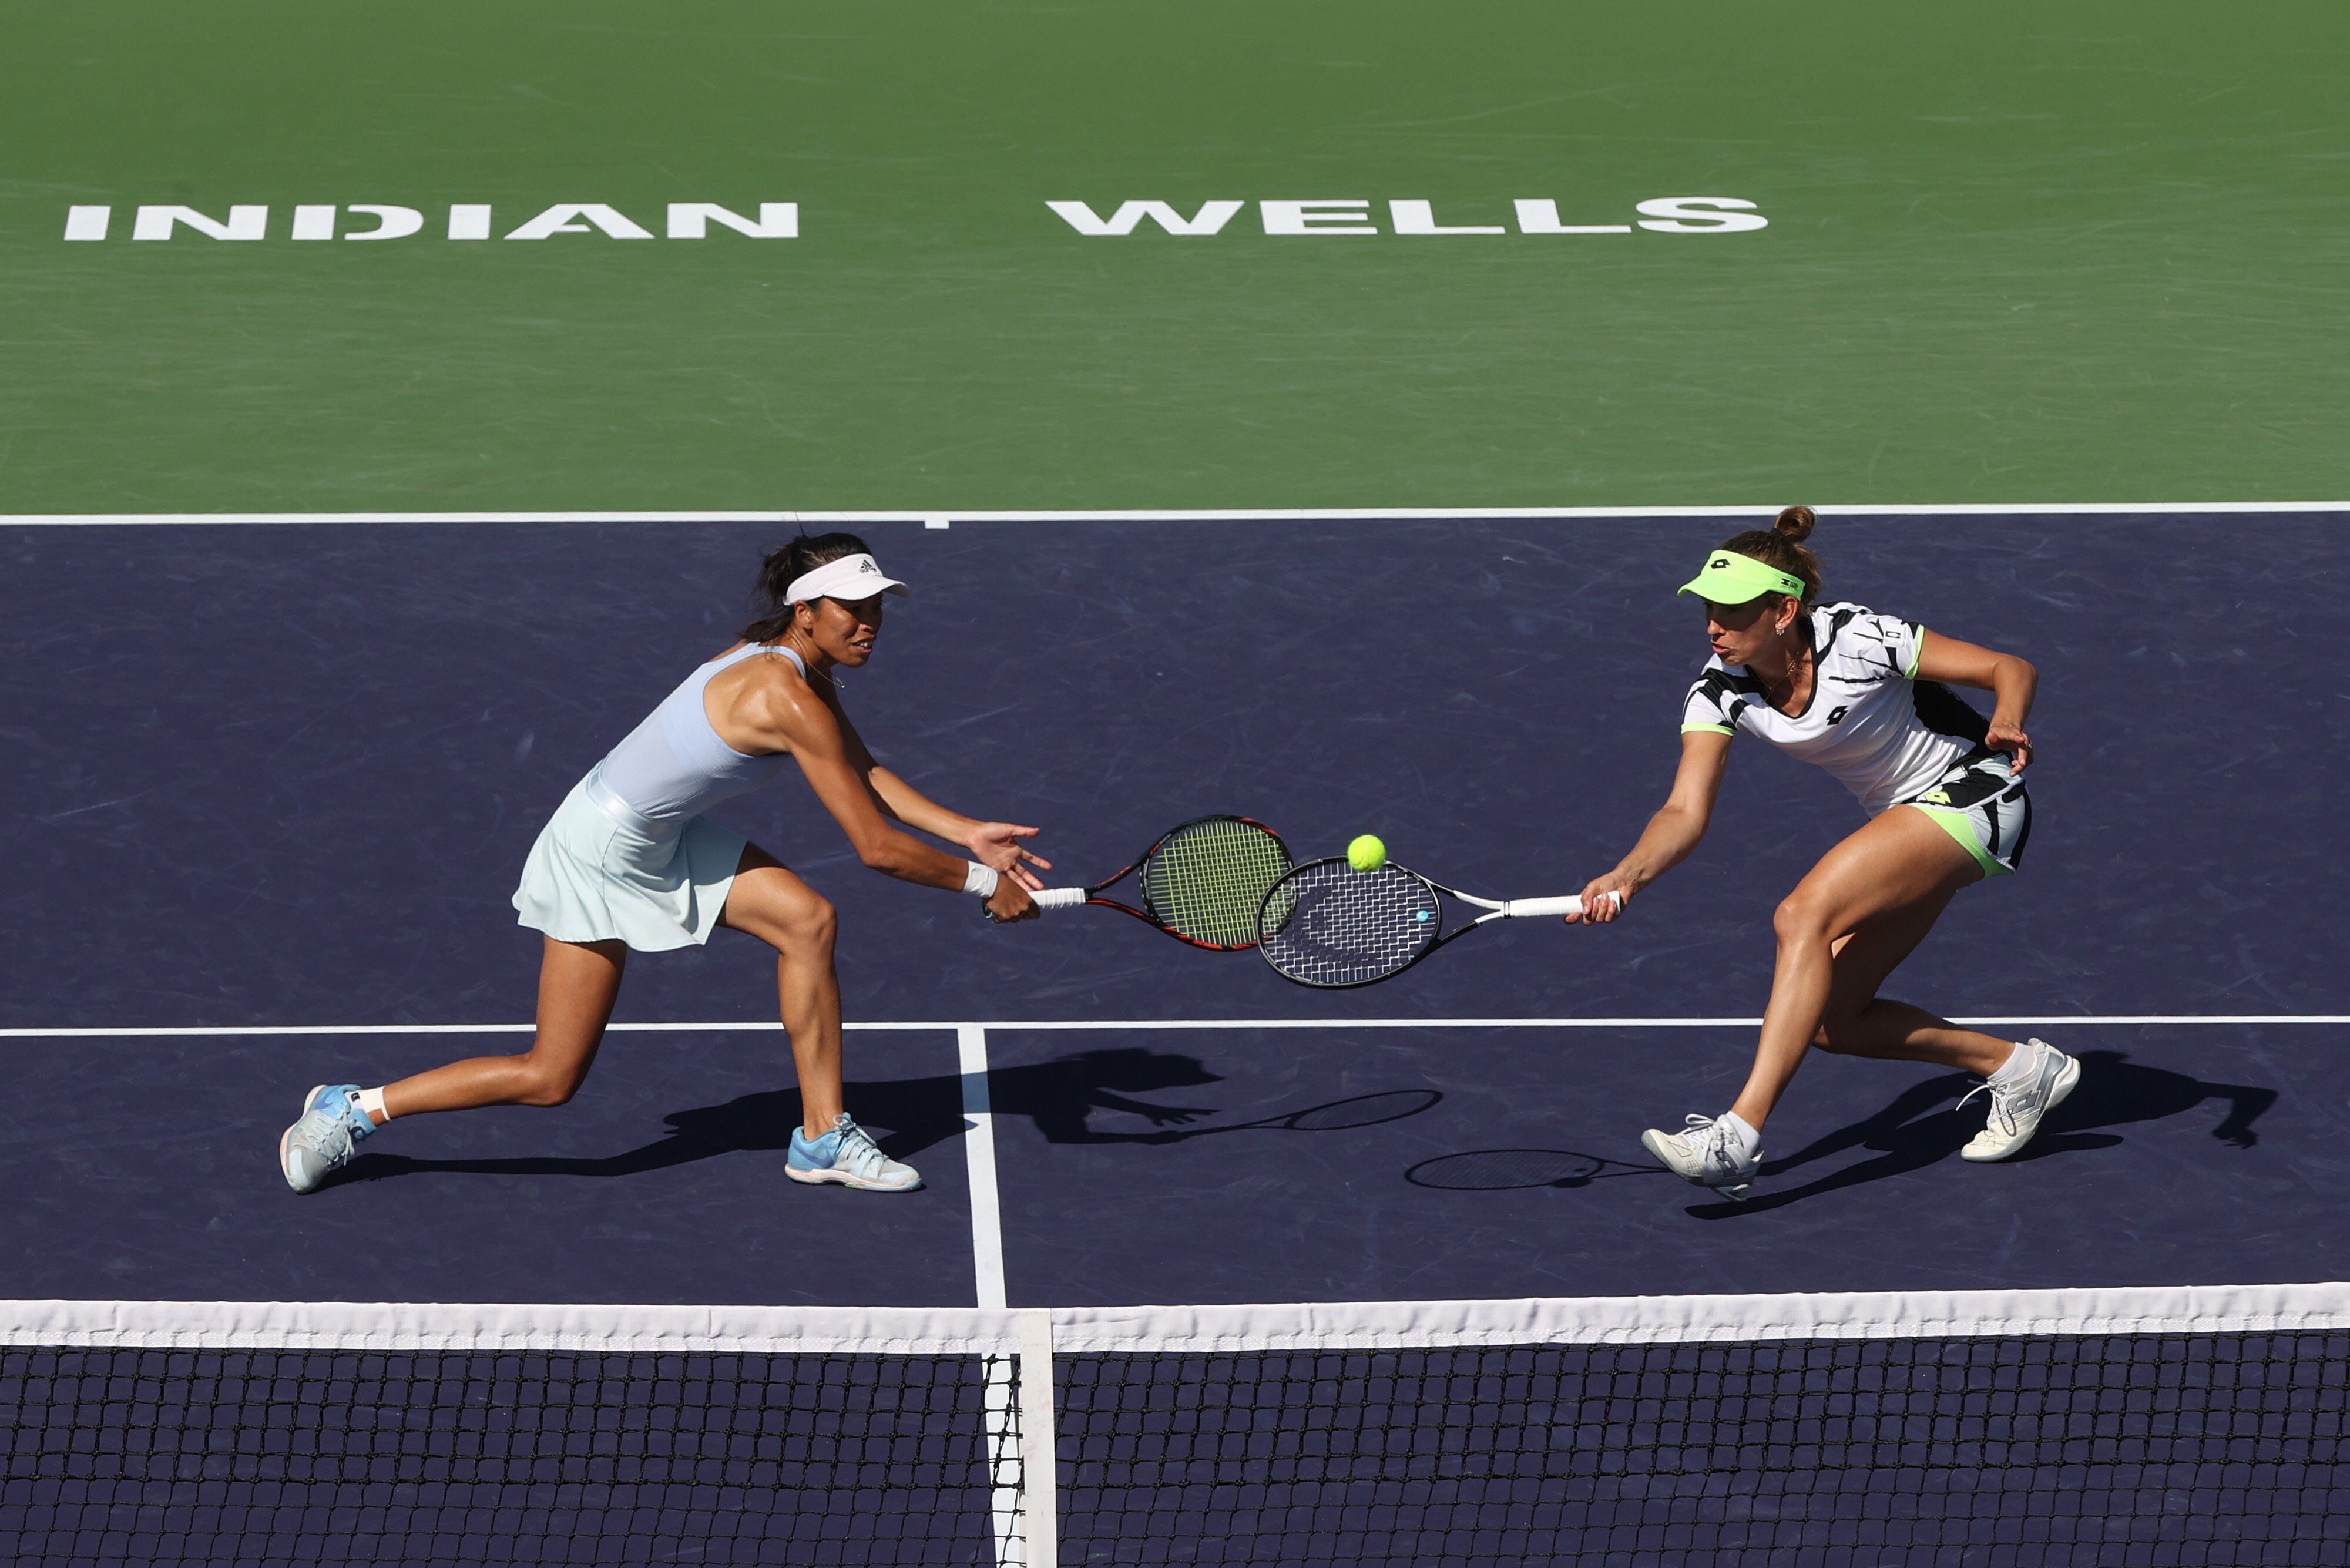 Hsieh Su-wei of Taiwan and Elise Mertens of Belgium in action against Bethanie Mattek-Sands of the US and Iga Swiatek of Poland during the 2021 BNP Paribas Open at Indian Wells. Photo: AFP